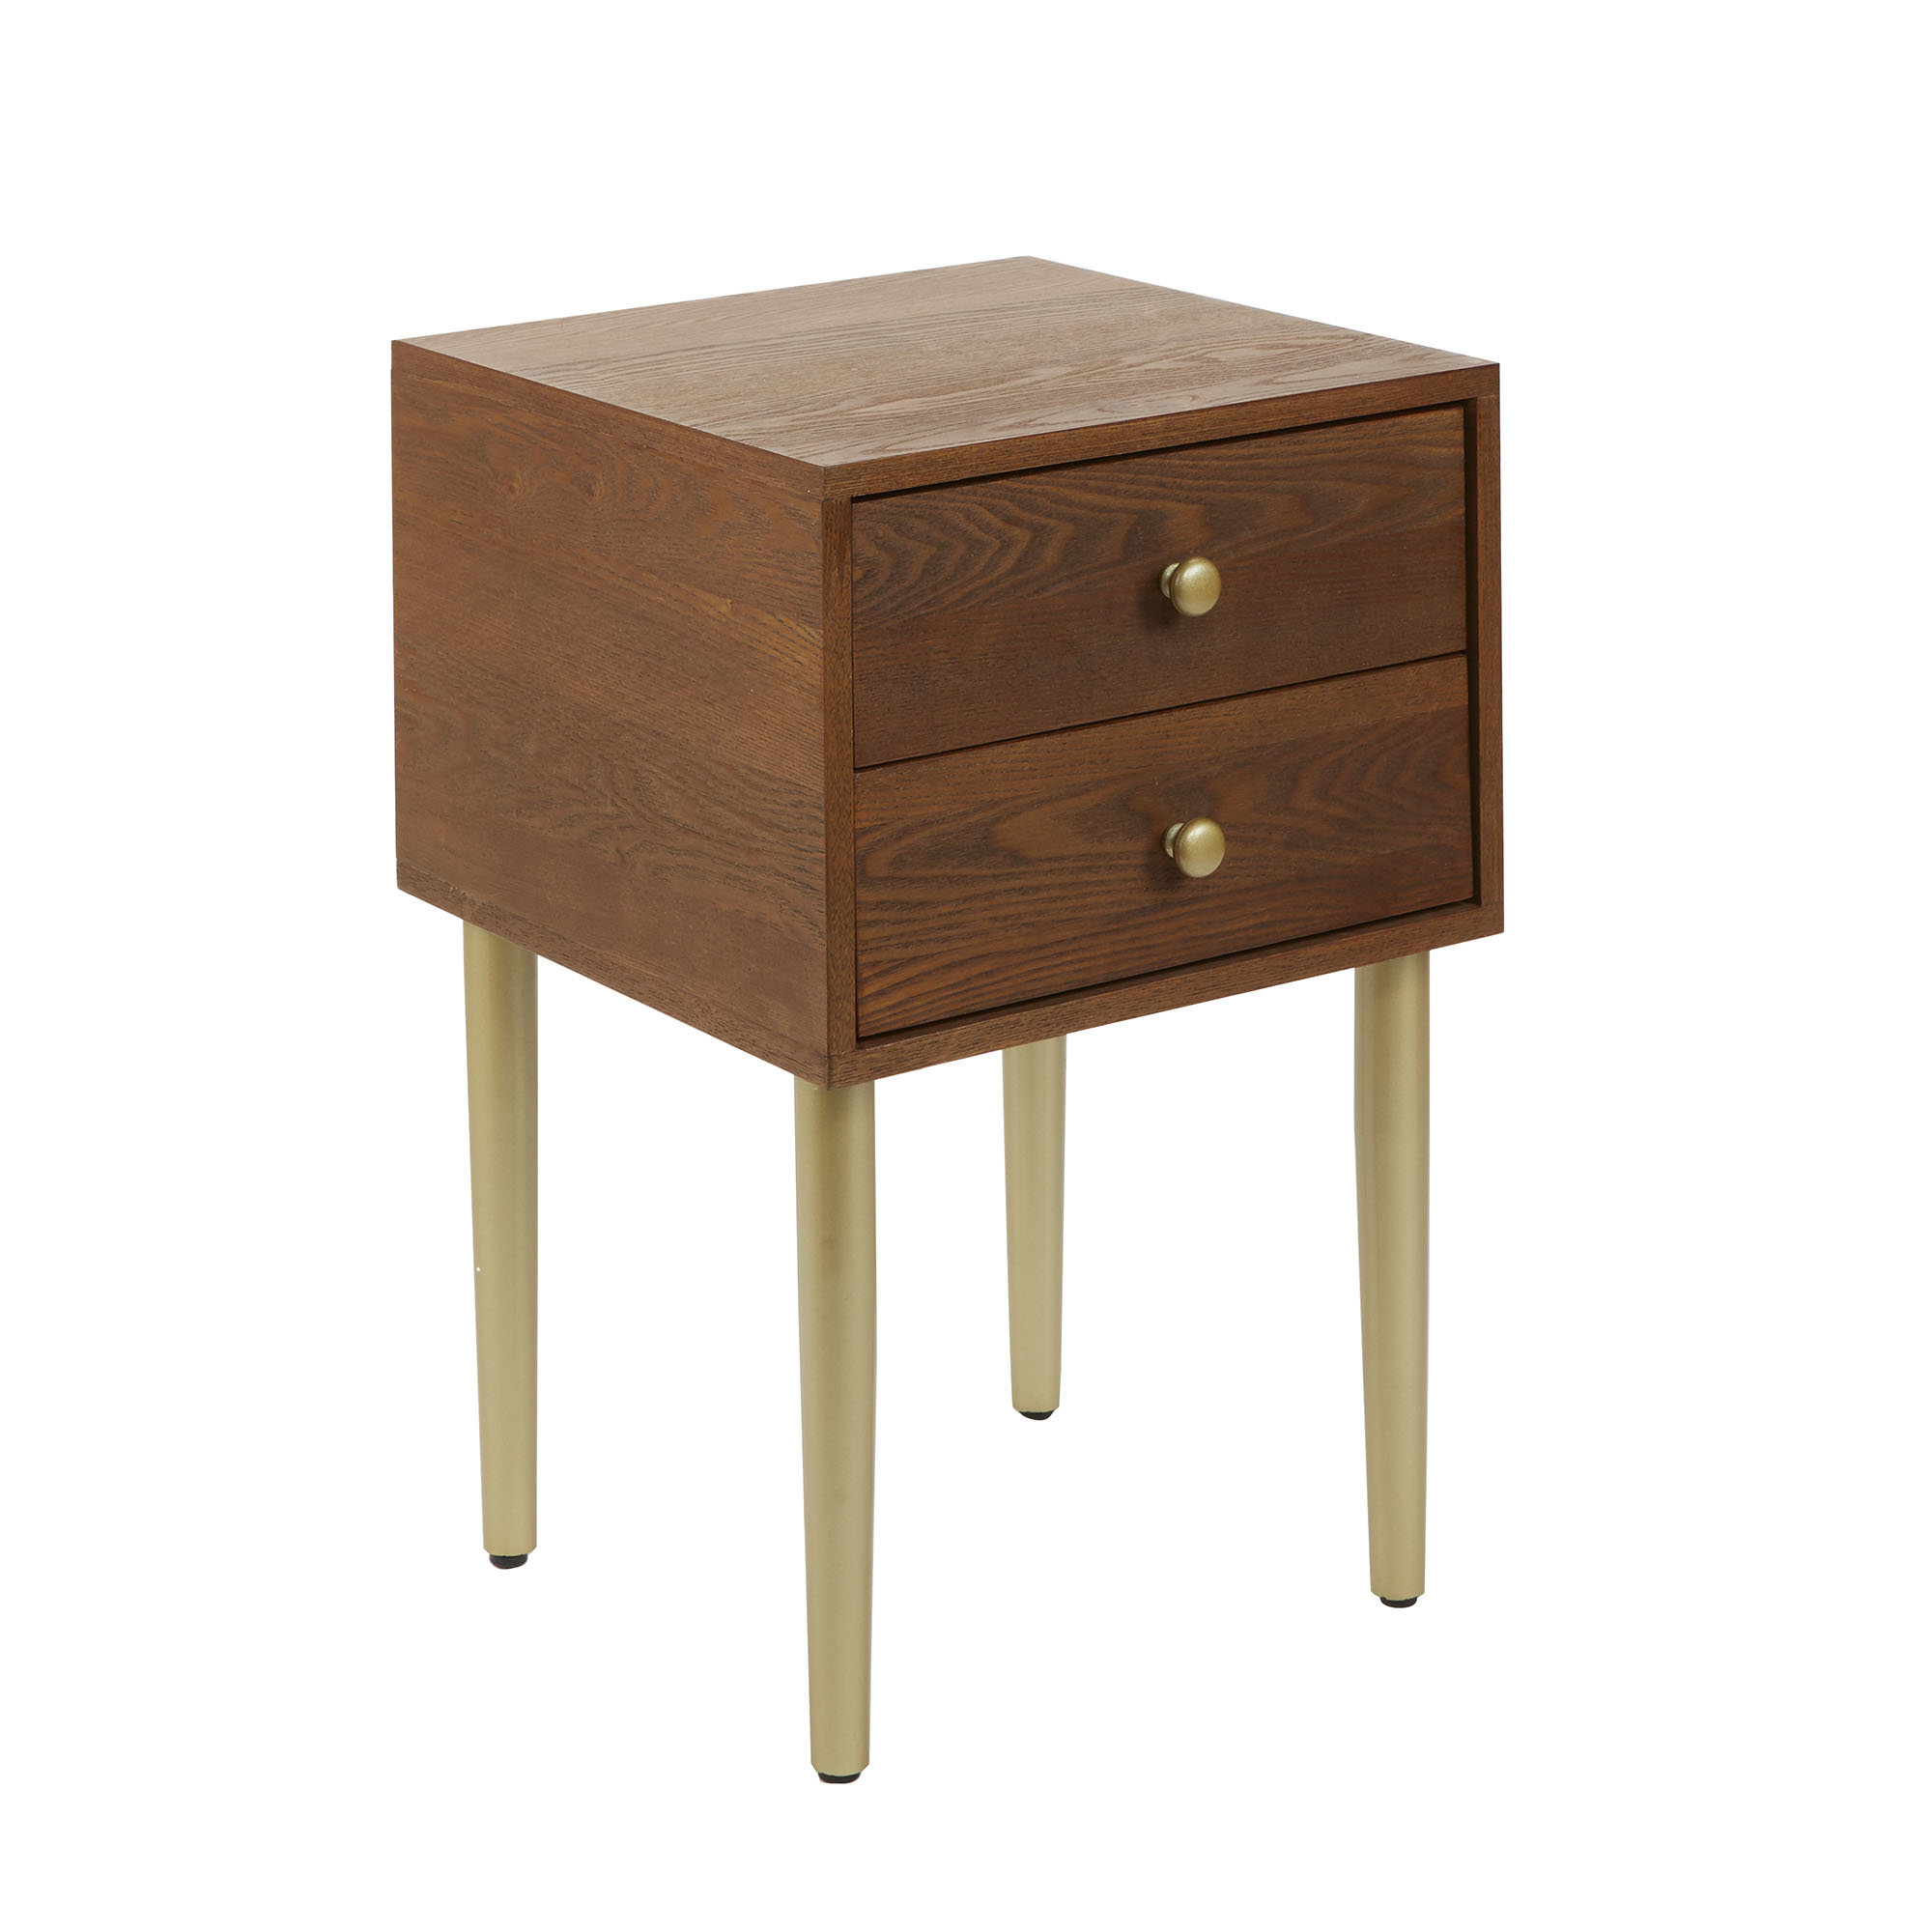 modern new furniture loic end table twisted mango wood accent quickview round coffee cloth weber side outdoor hairpin legs dressers toronto polka dot tablecloth art pottery barn